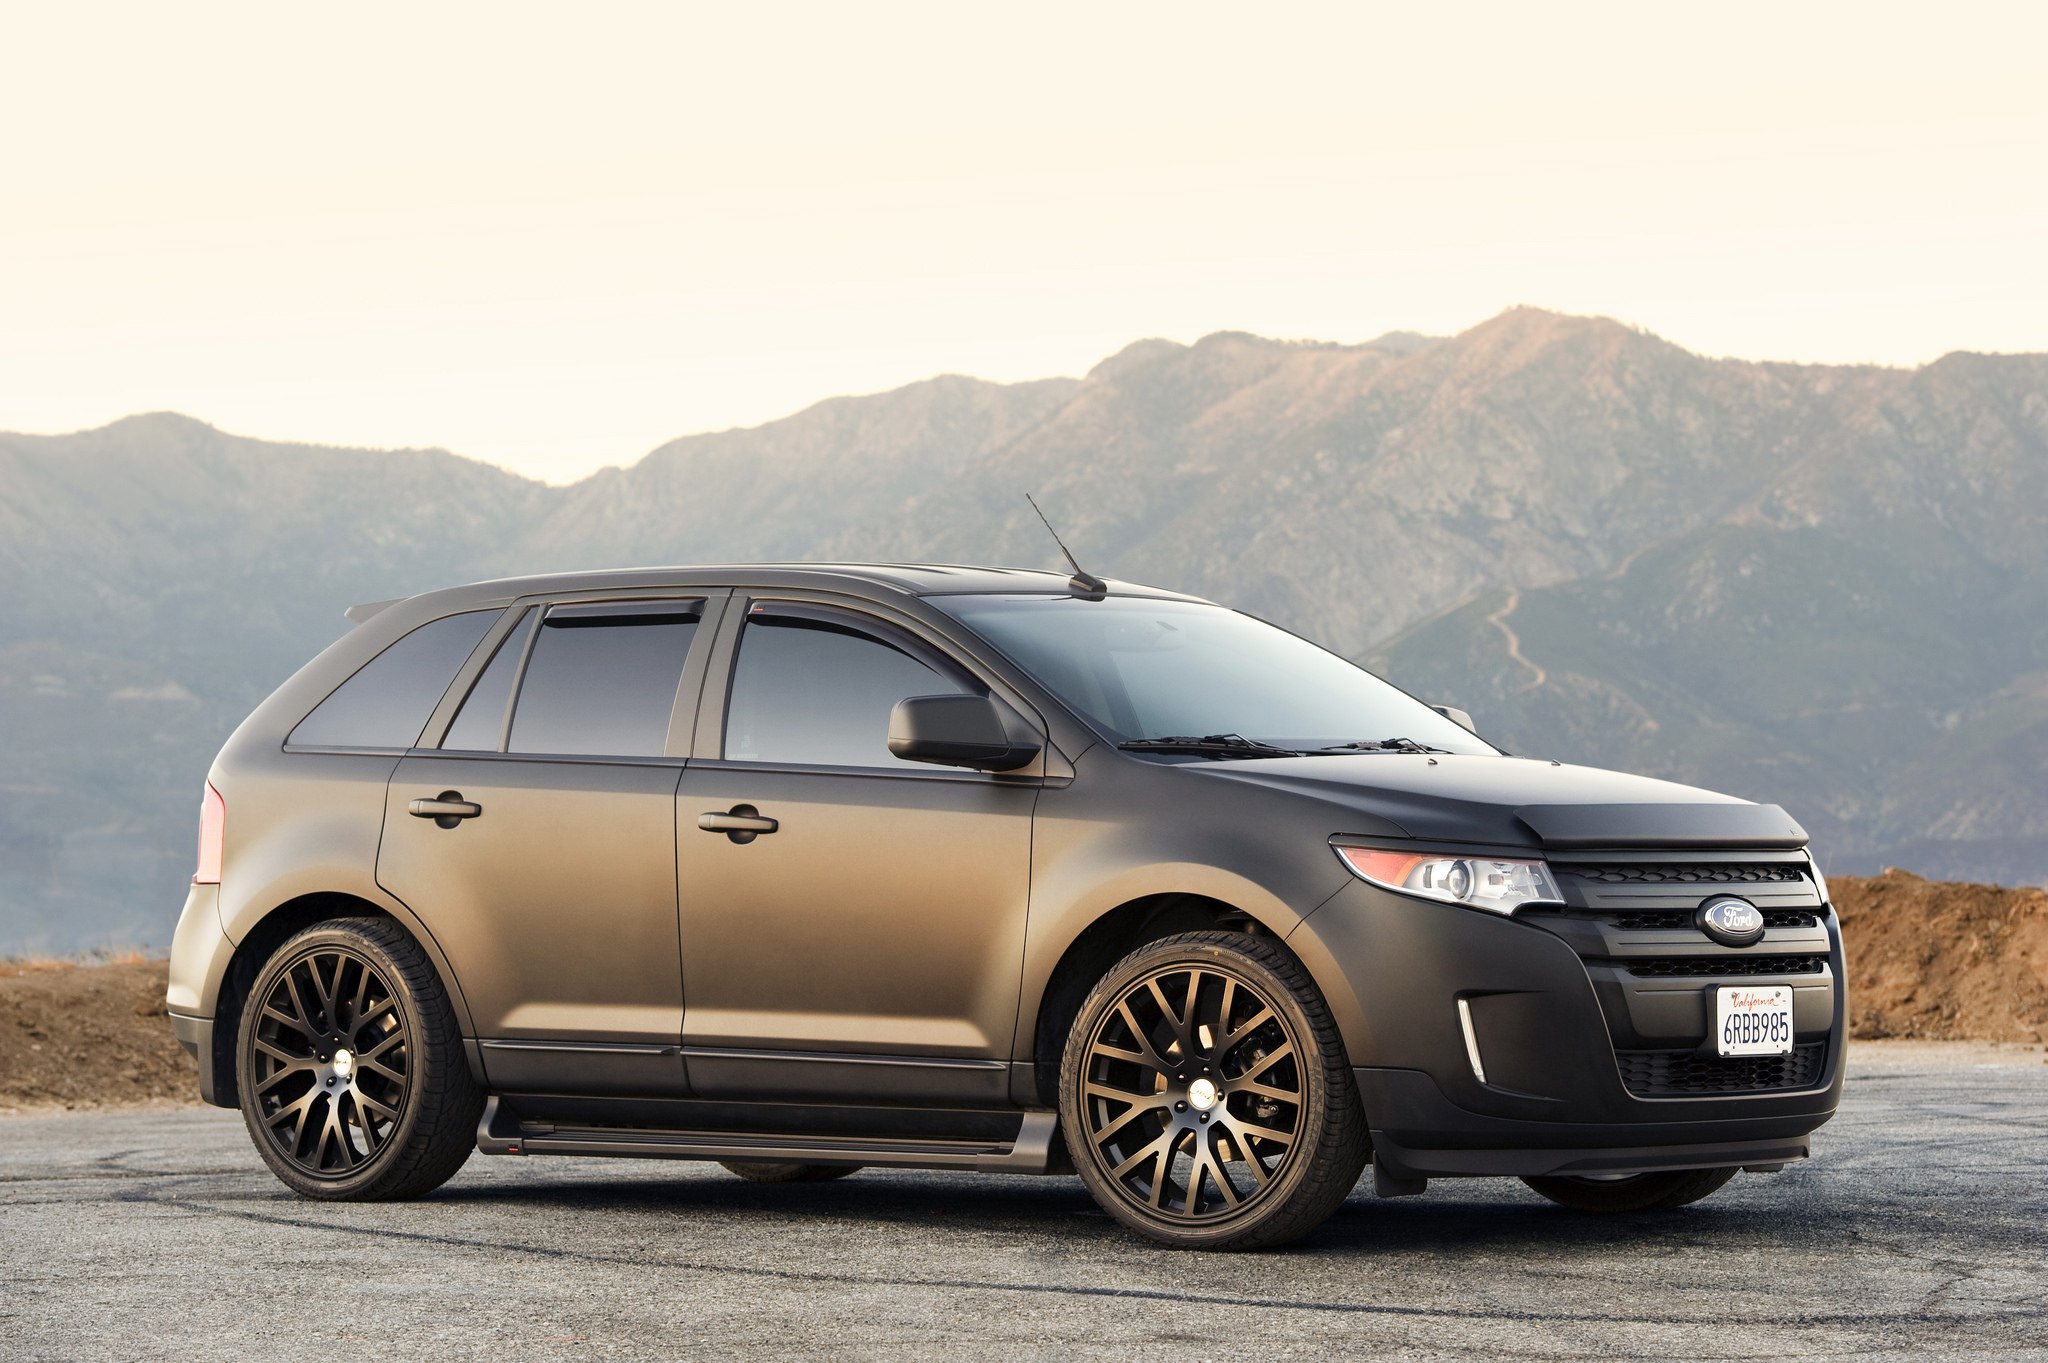 Aftermarket Front Bumper on Black Matte Ford Edge - Photo by TSW